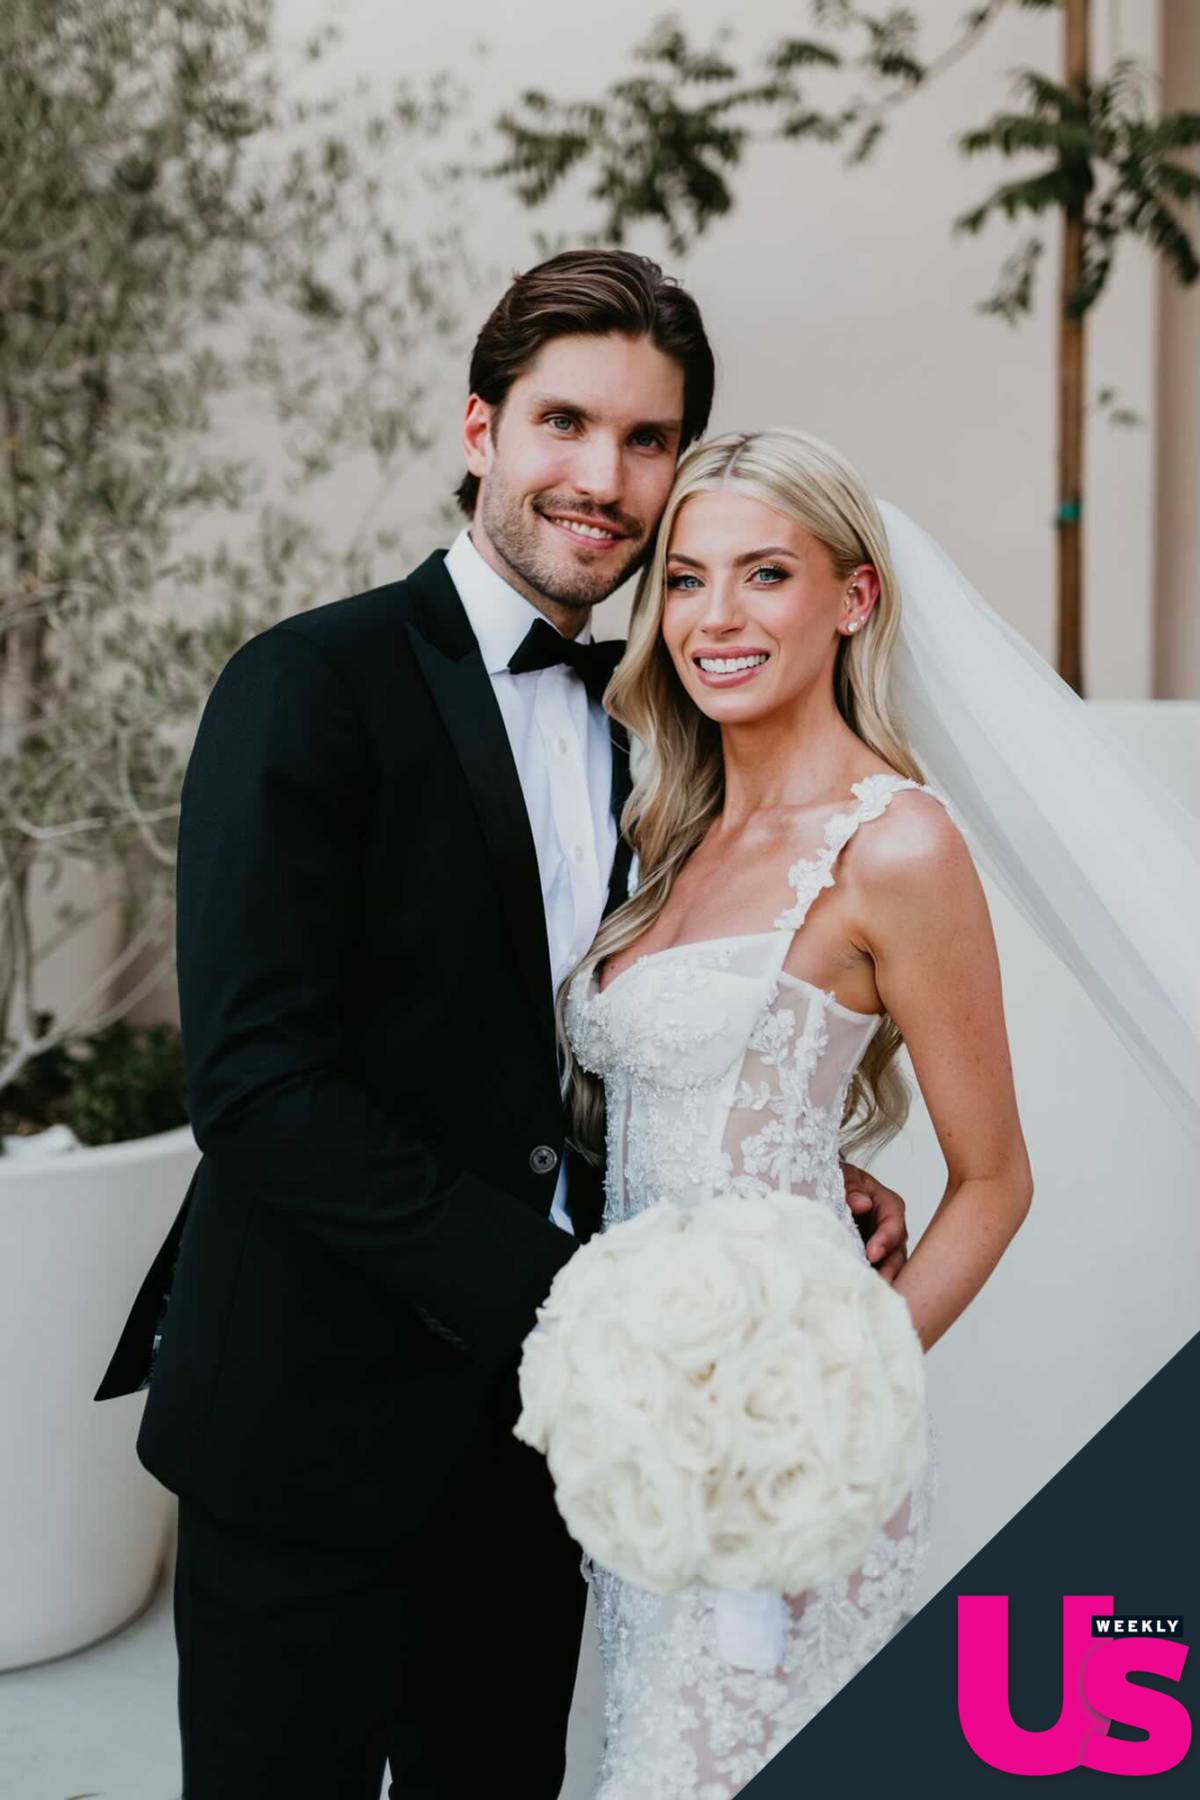 The Bachelor's Haley Ferguson and Oula Palve Are Married After Las Vegas Wedding: See the Romantic Photos